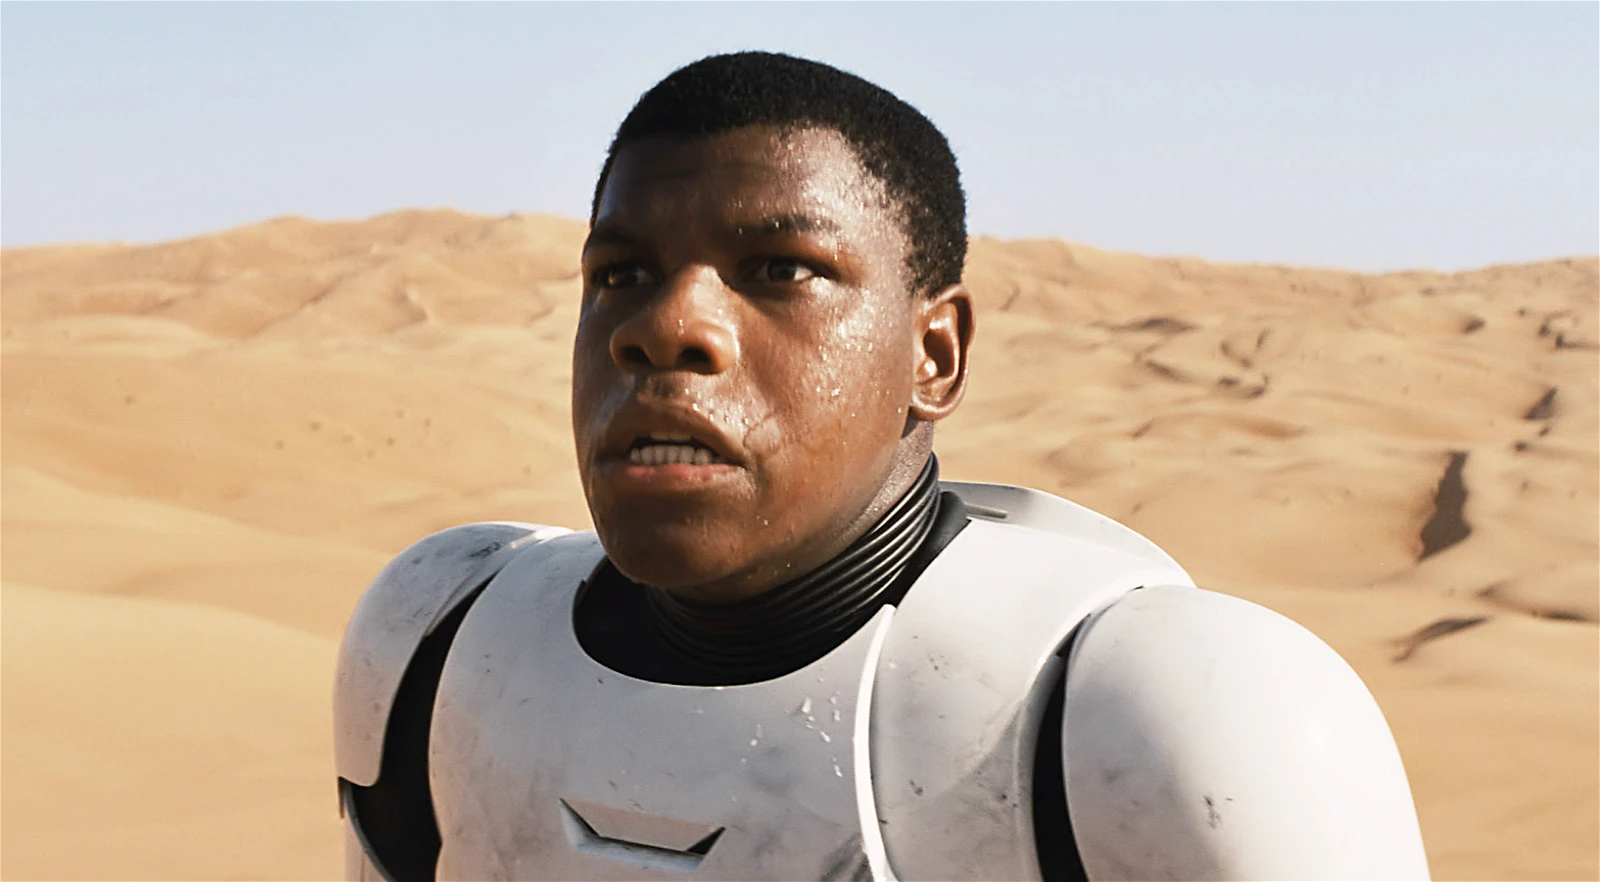 John Boyega is known for his role as Finn in the Star Wars franchise.